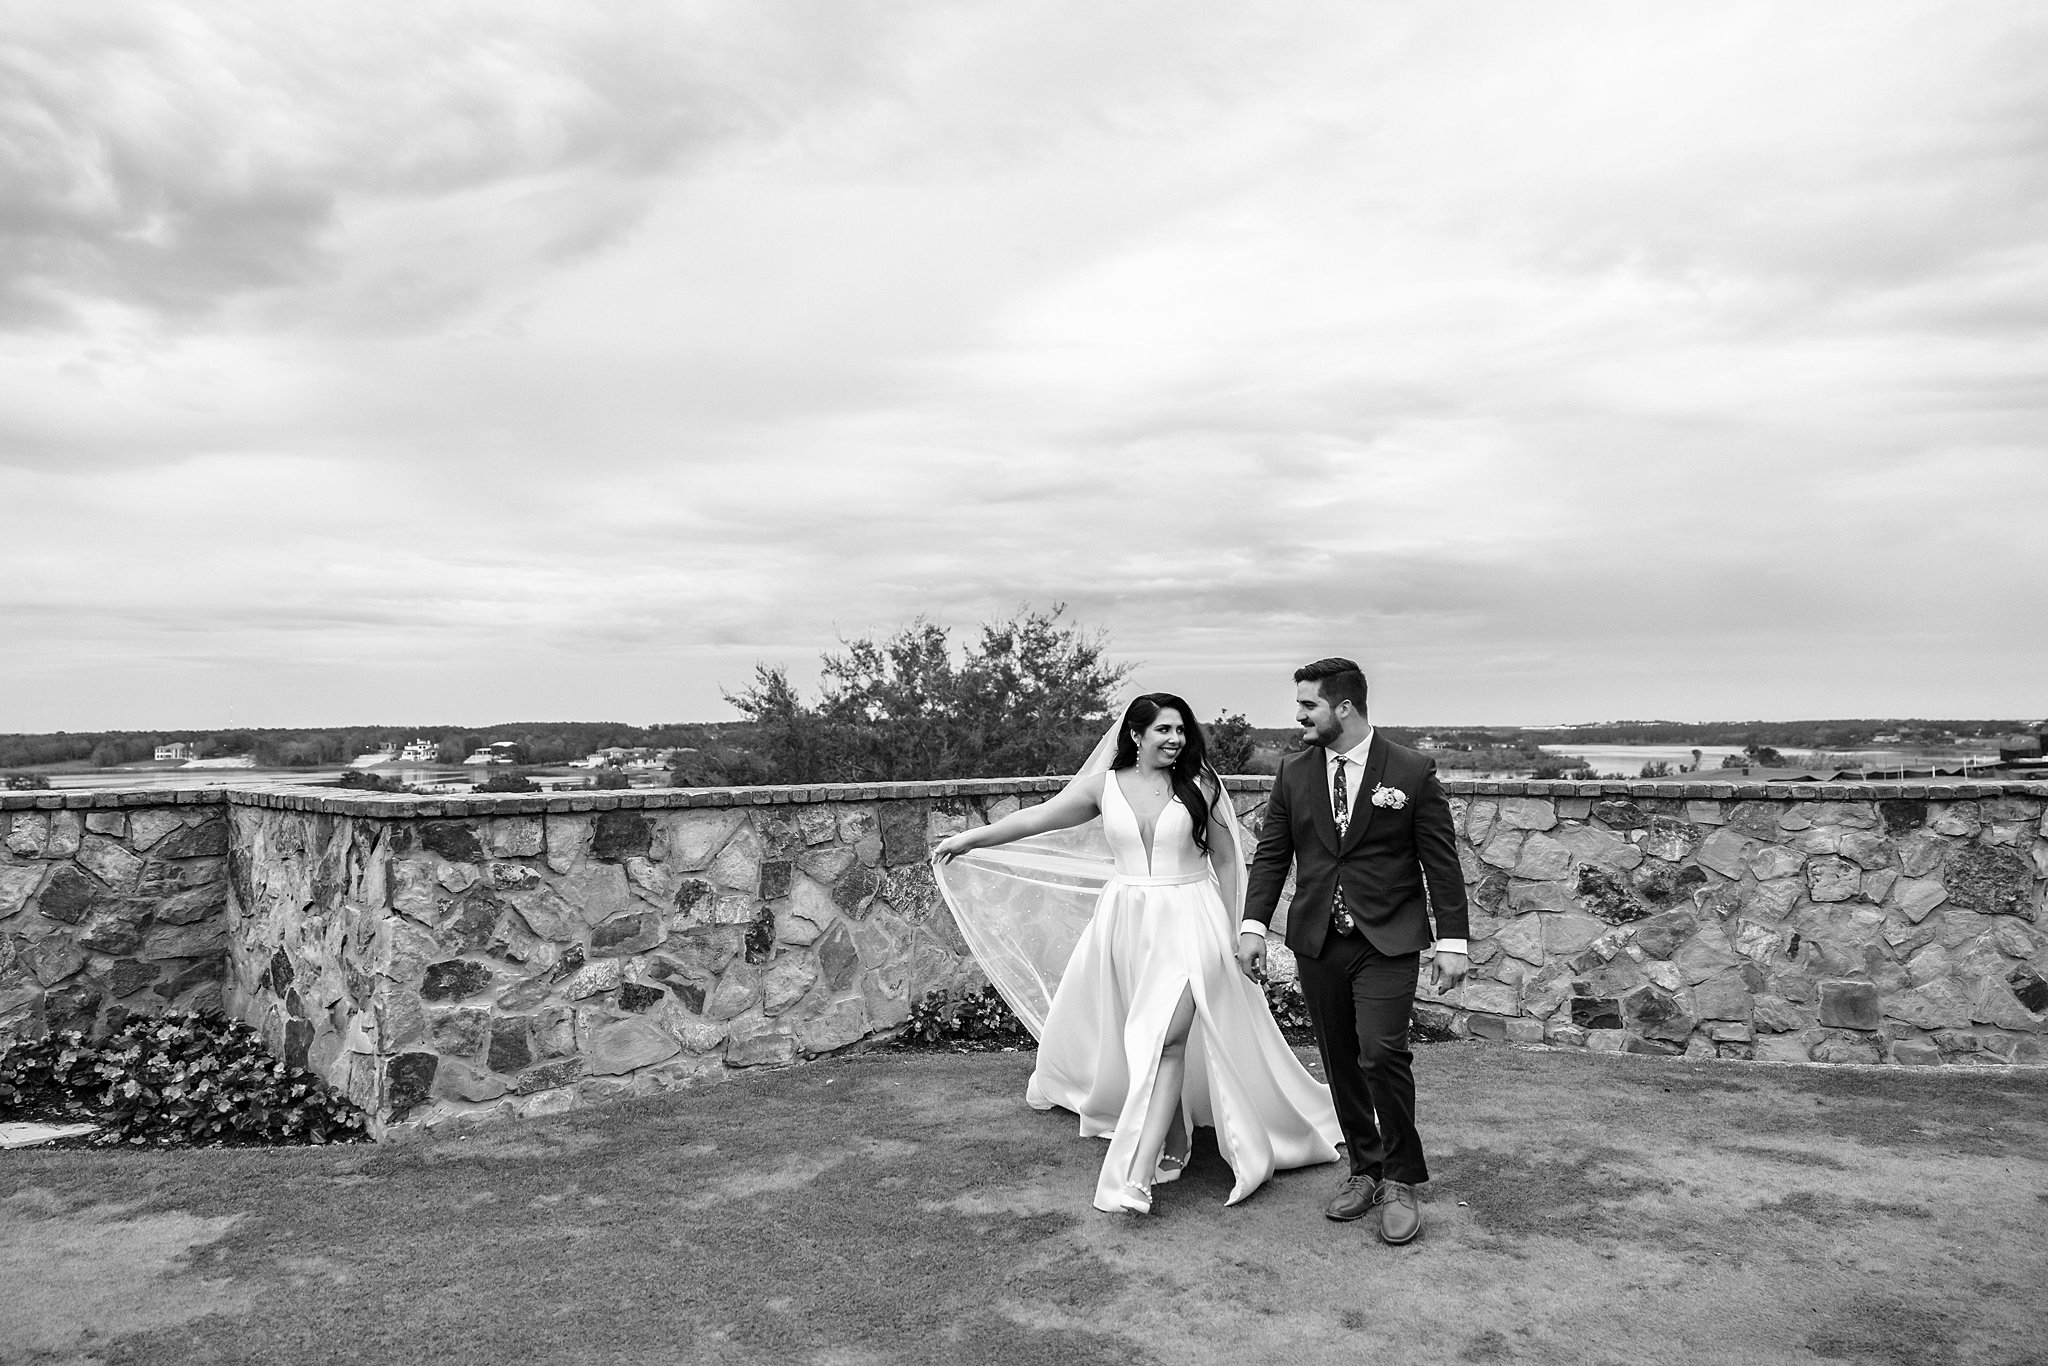 Newlyweds walk hand in hand on a garden terrace with stone walls